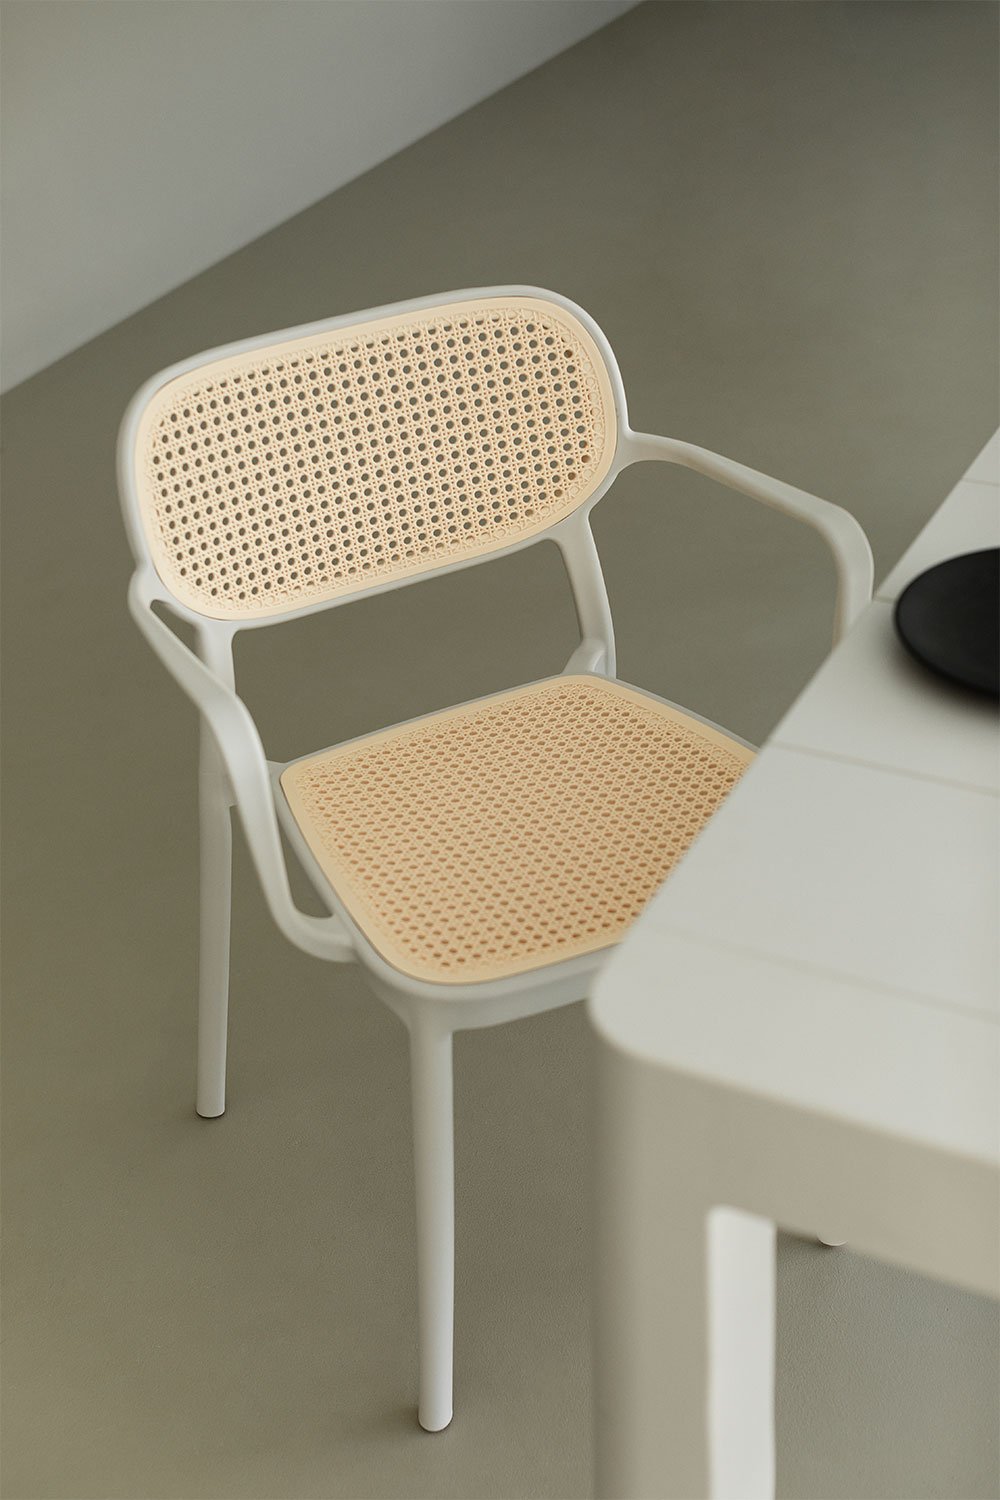 Omara Stackable Dining Chair with Armrests, gallery image 1